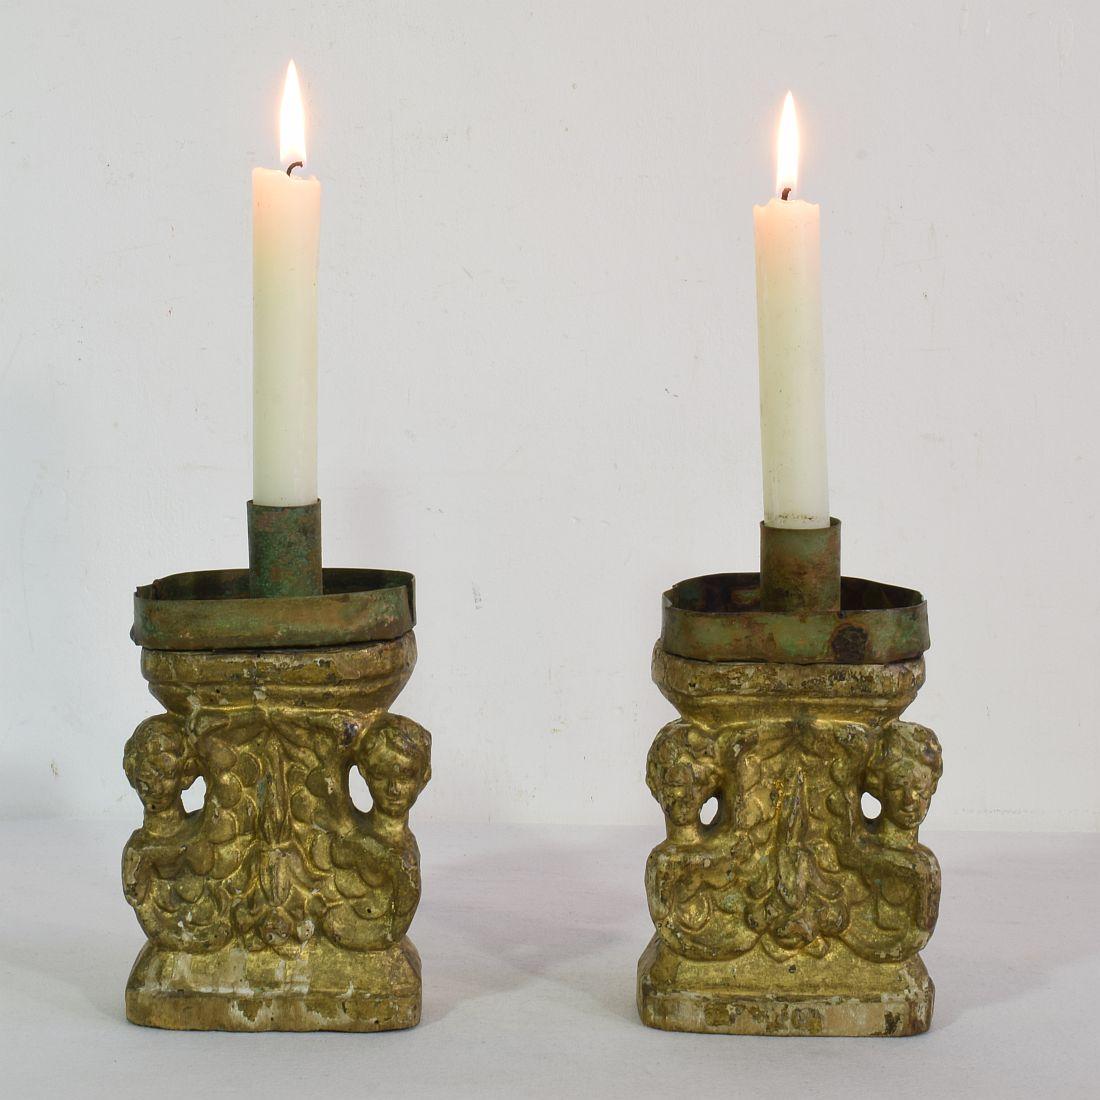 Hand-Carved Pair of Small 17th/18th Century Italian Carved Baroque Candleholders with Angels